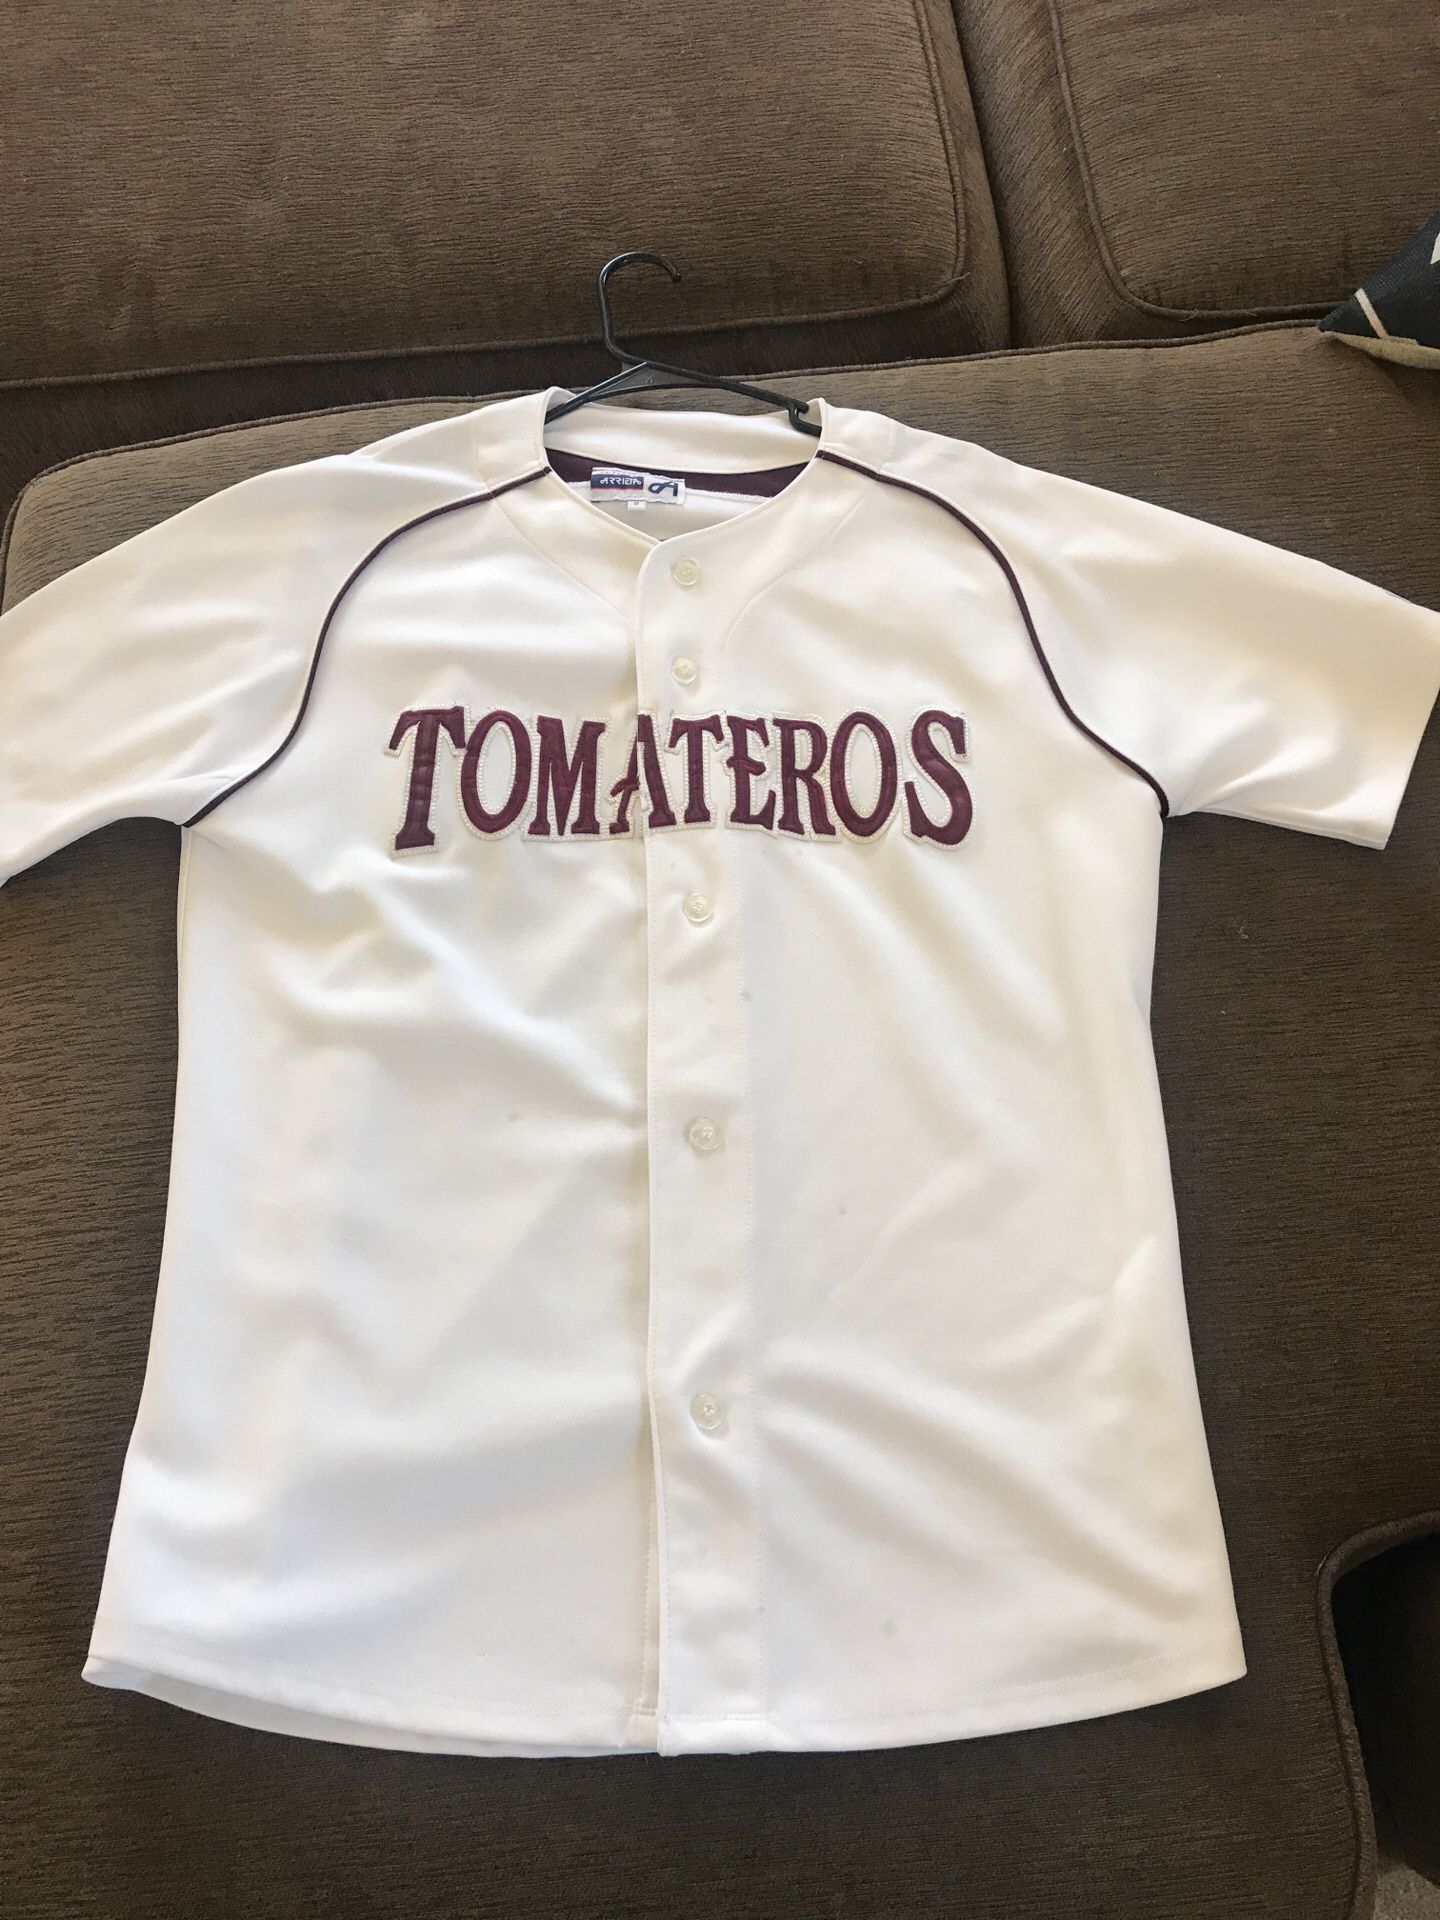 Original tomateros de culiacan Jersey Large for Sale in Victorville, CA -  OfferUp